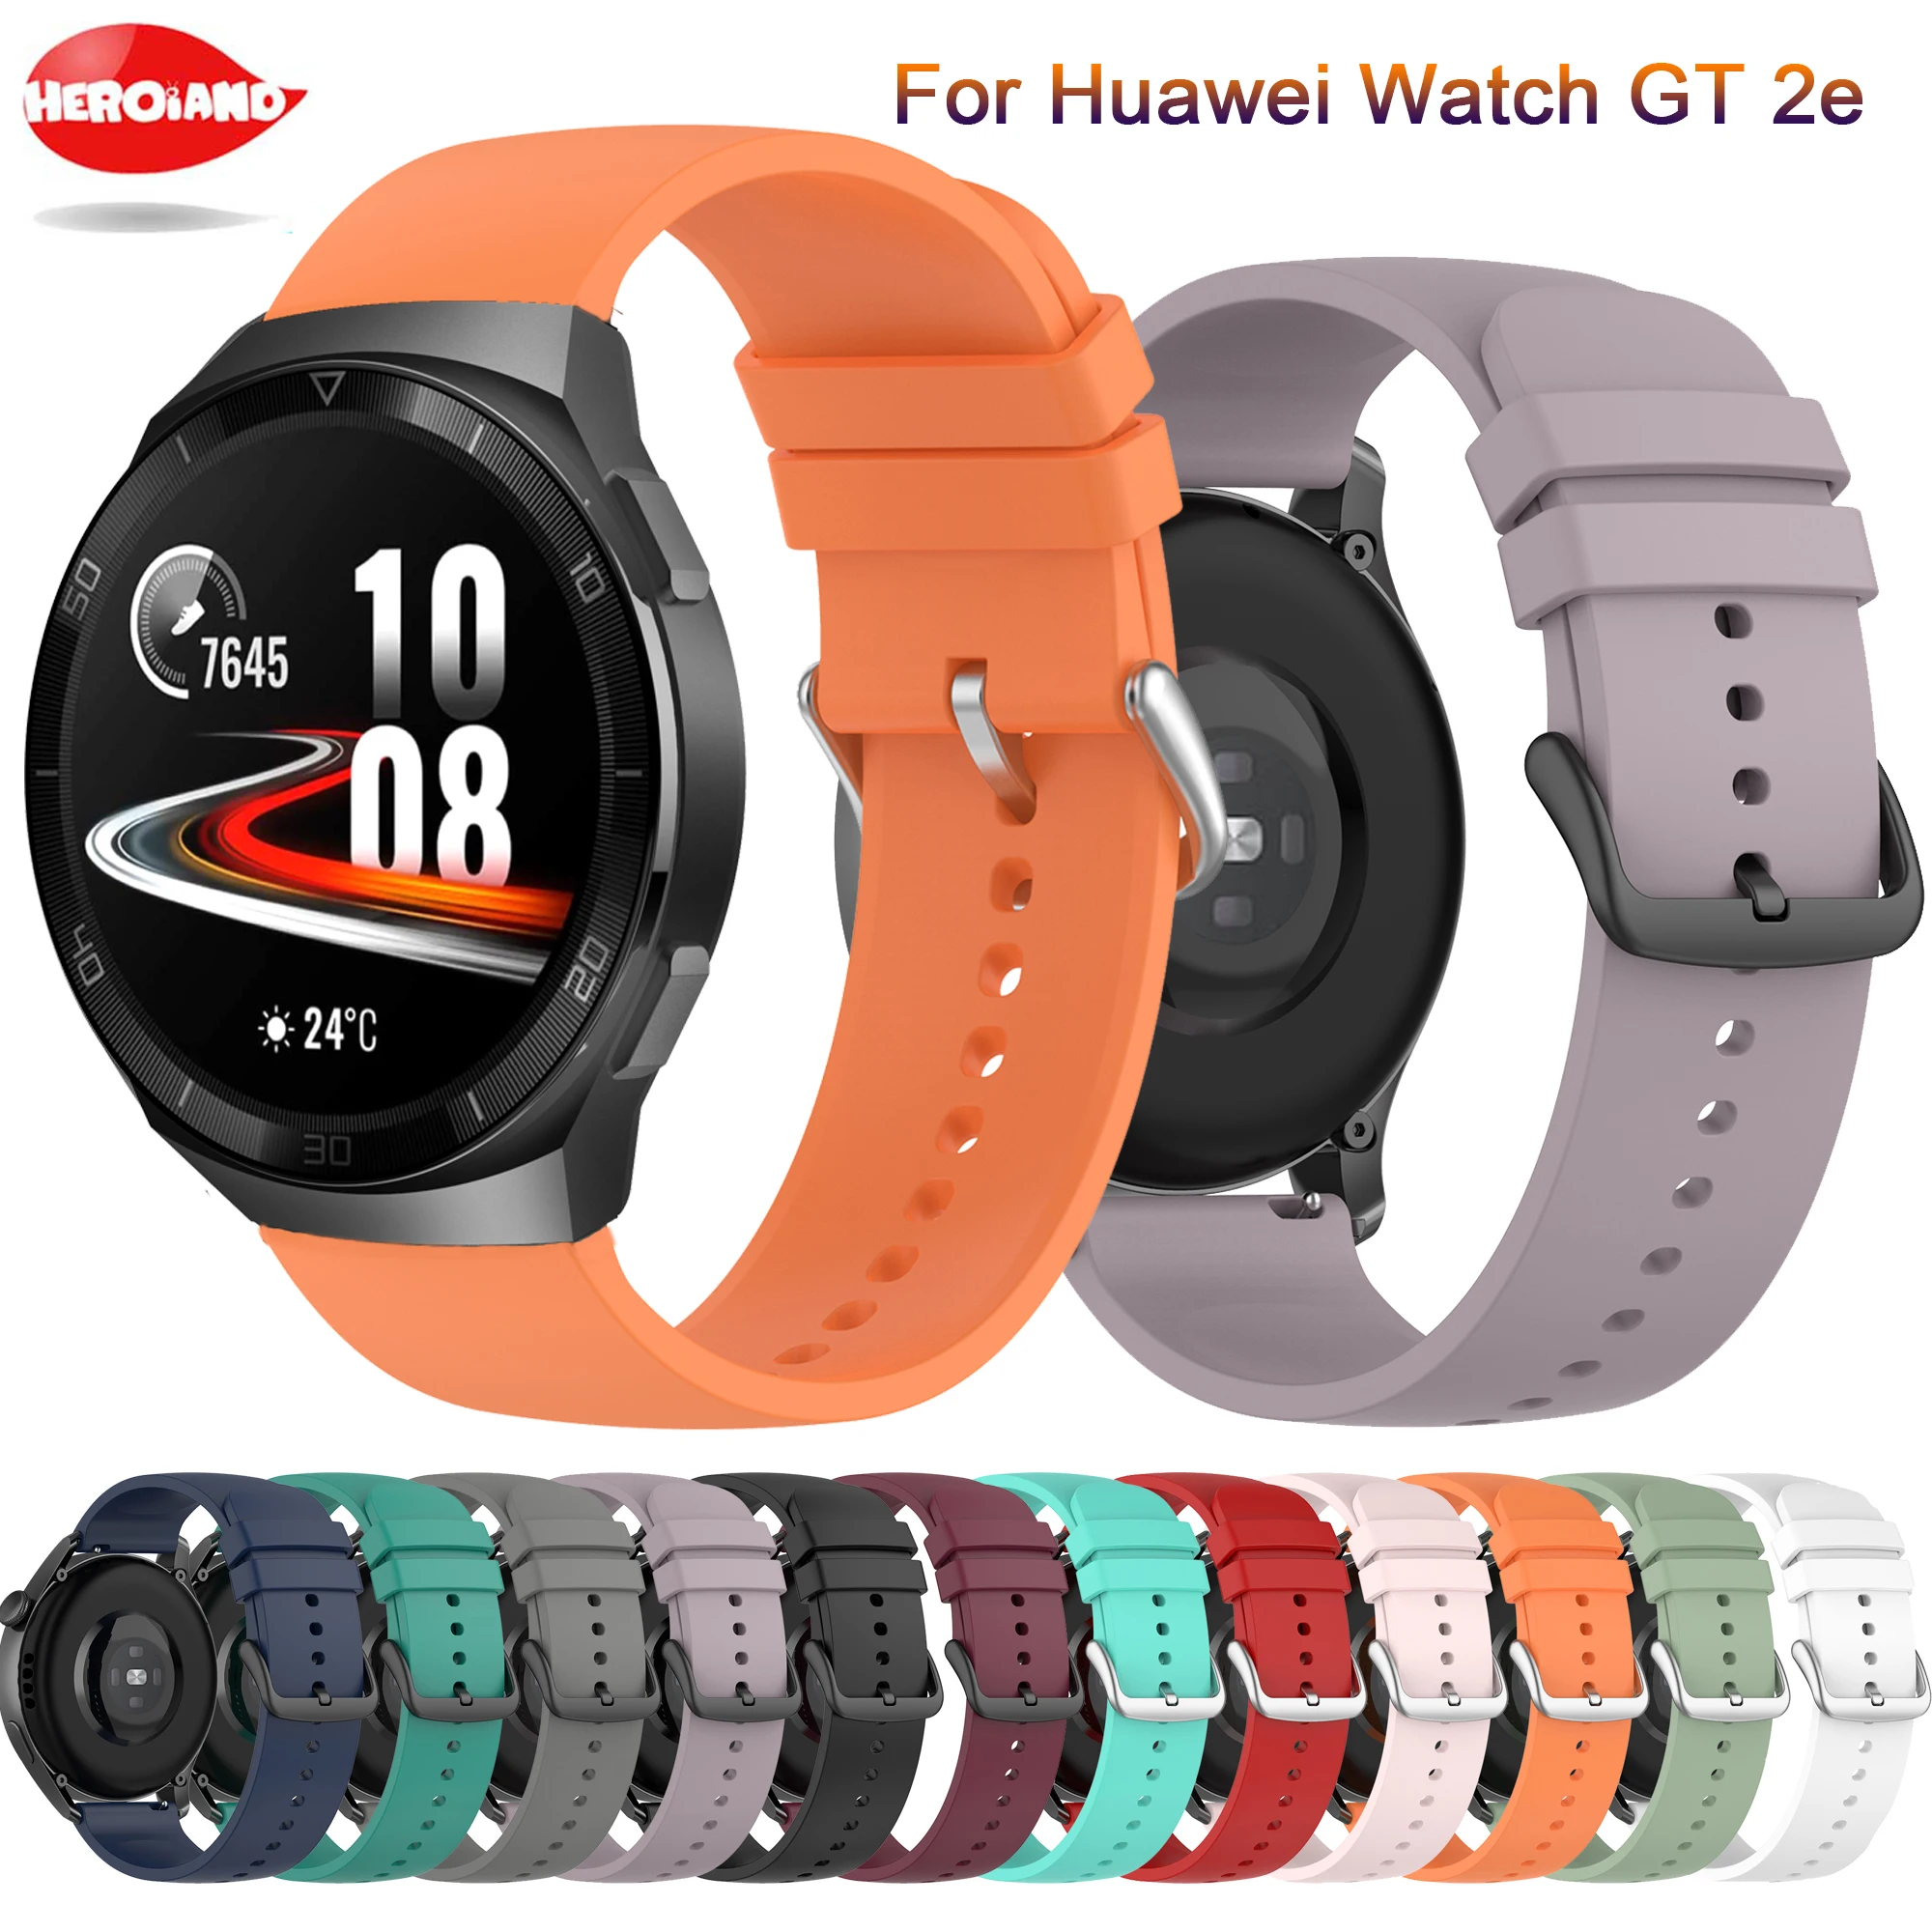 

Bracelet Band 22MM For huawei watch gt 2e /GT 1 / GT2 46MM smartwatch Replacement Silicone Watchstrap For Huawei Watch 2 pro New